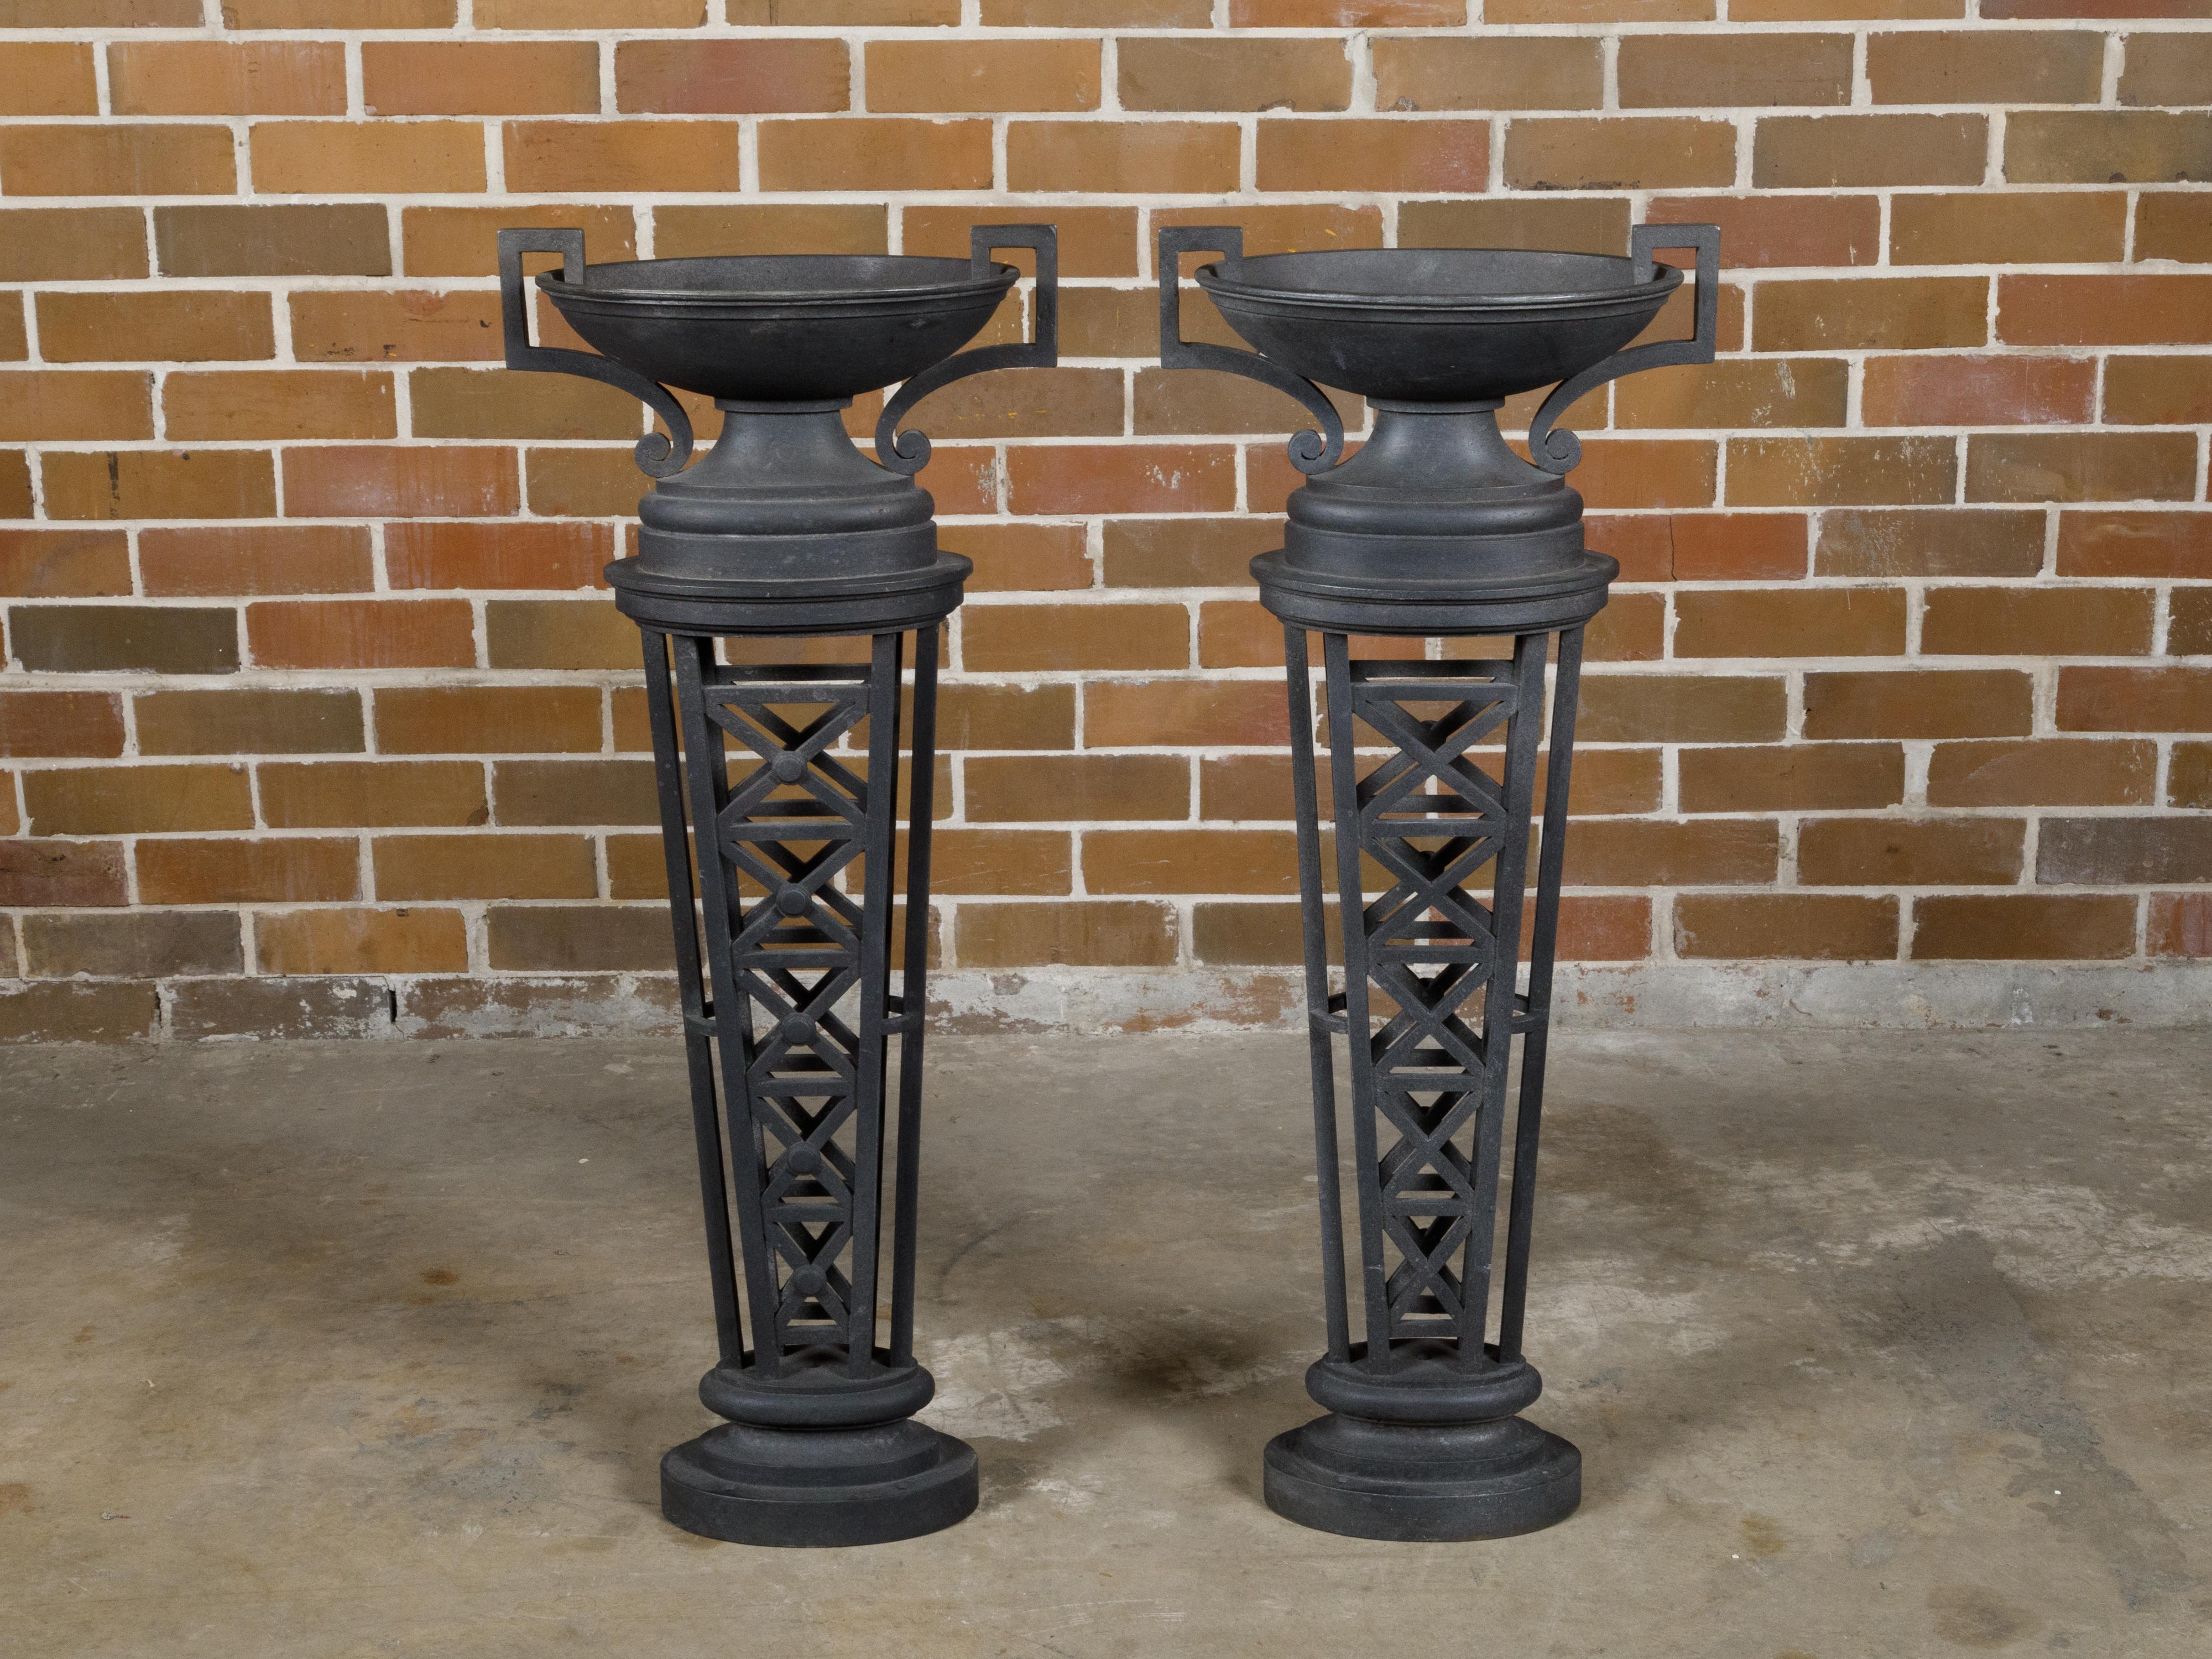 A pair of English Victorian period cast iron planters from the 19th century with Neoclassical urns sitting atop tapering pilasters. This exquisite pair of English Victorian period cast iron planters, dating back to the 19th century, beautifully